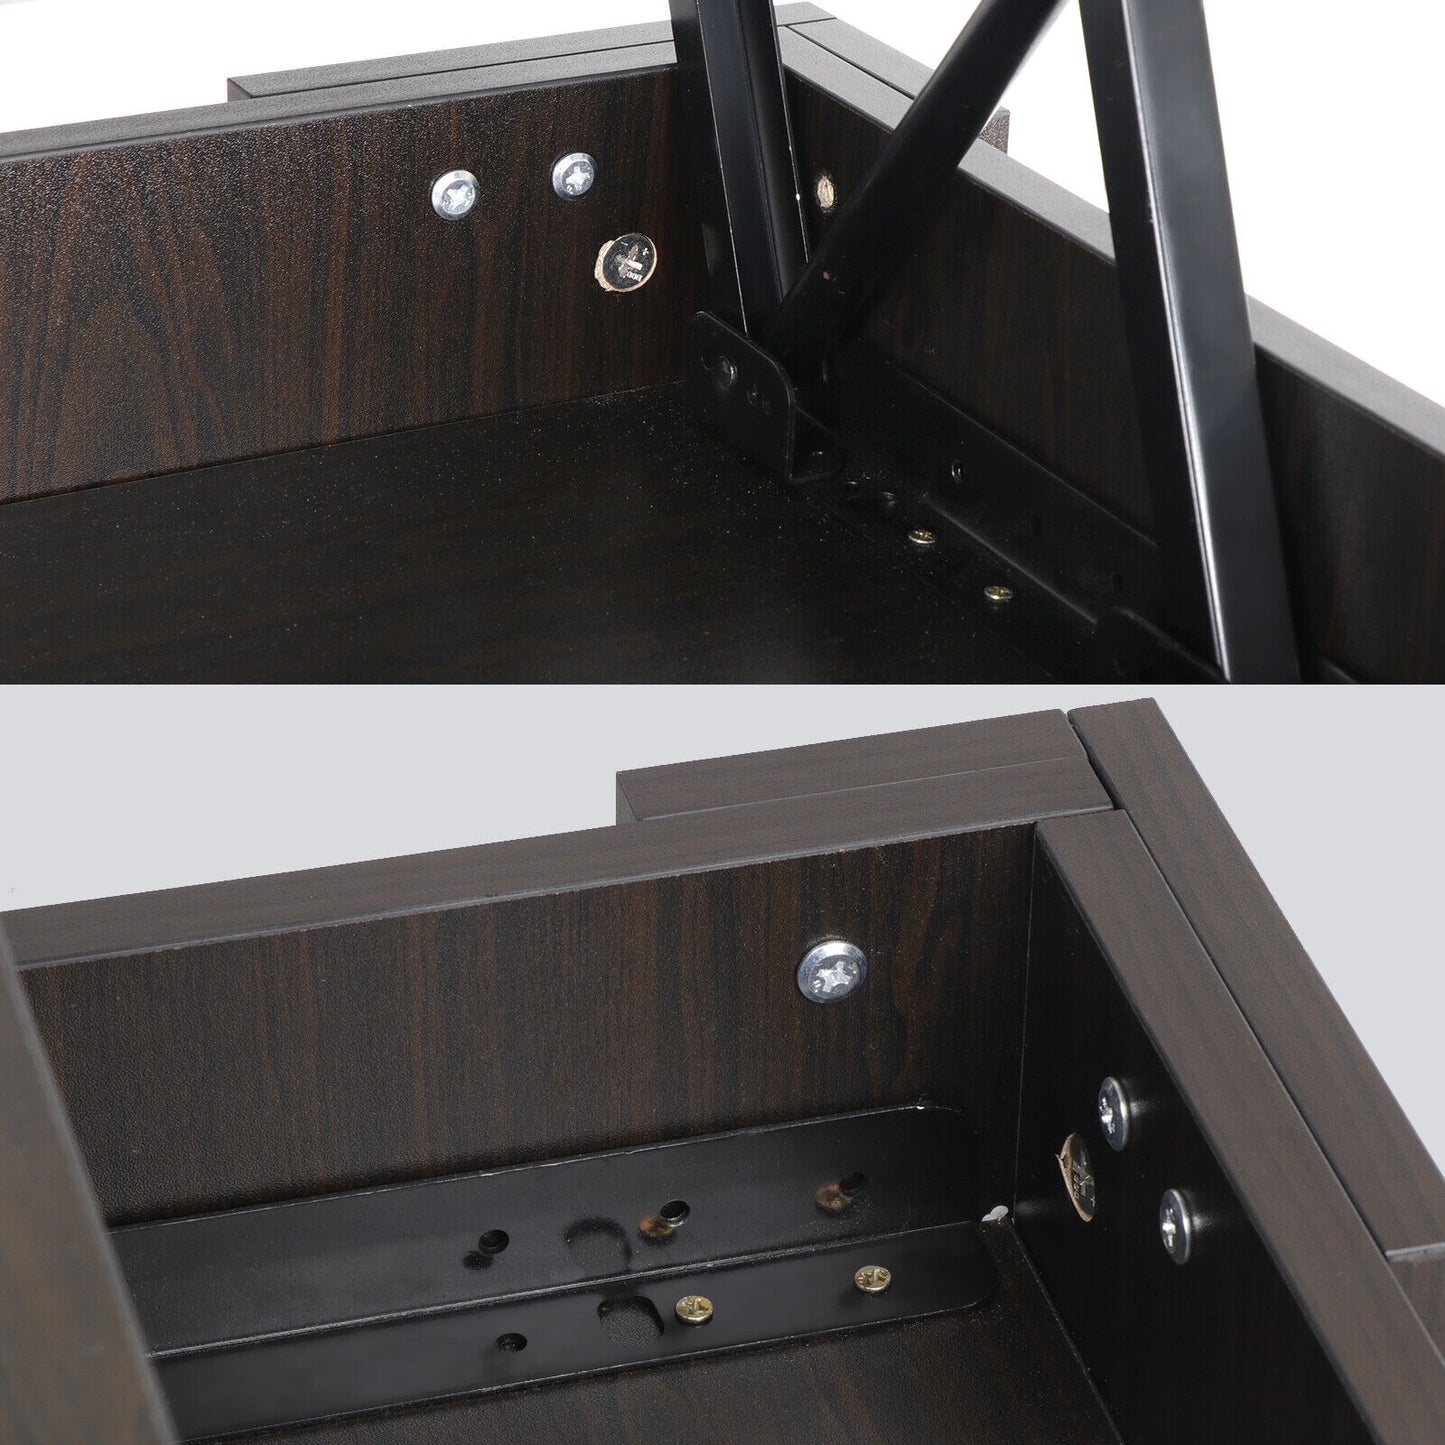 Multifunctional Coffee Table Lift-up Top Hidden Storage Compartment Lower Shelf